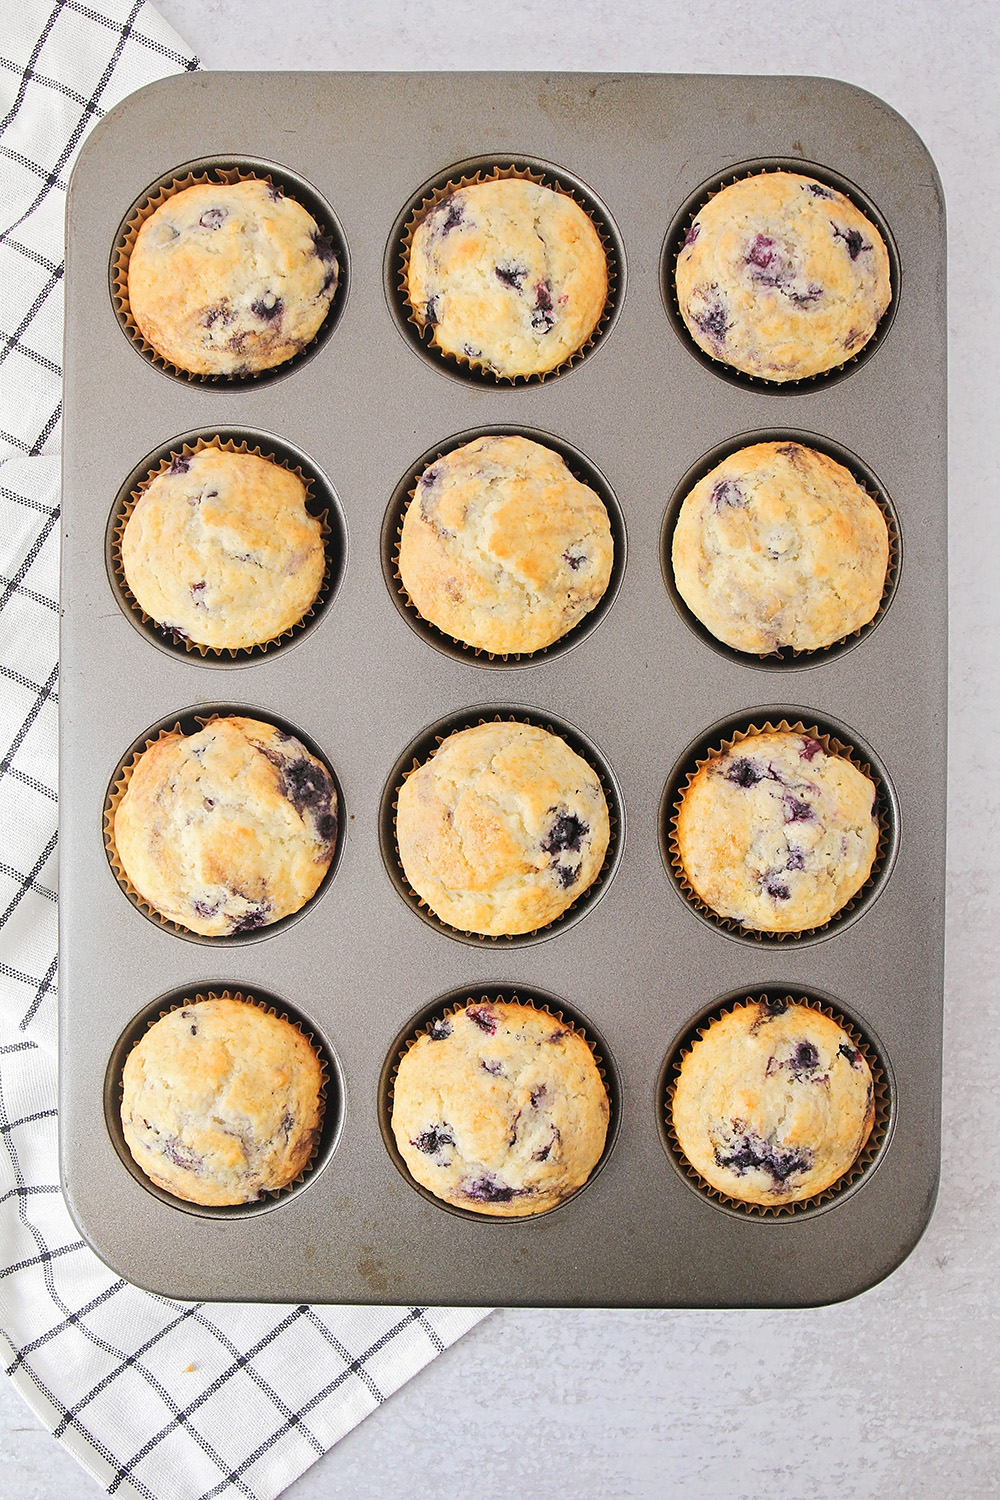 These huckleberry muffins are so light and fluffy, with delicious little huckleberries studded throughout!